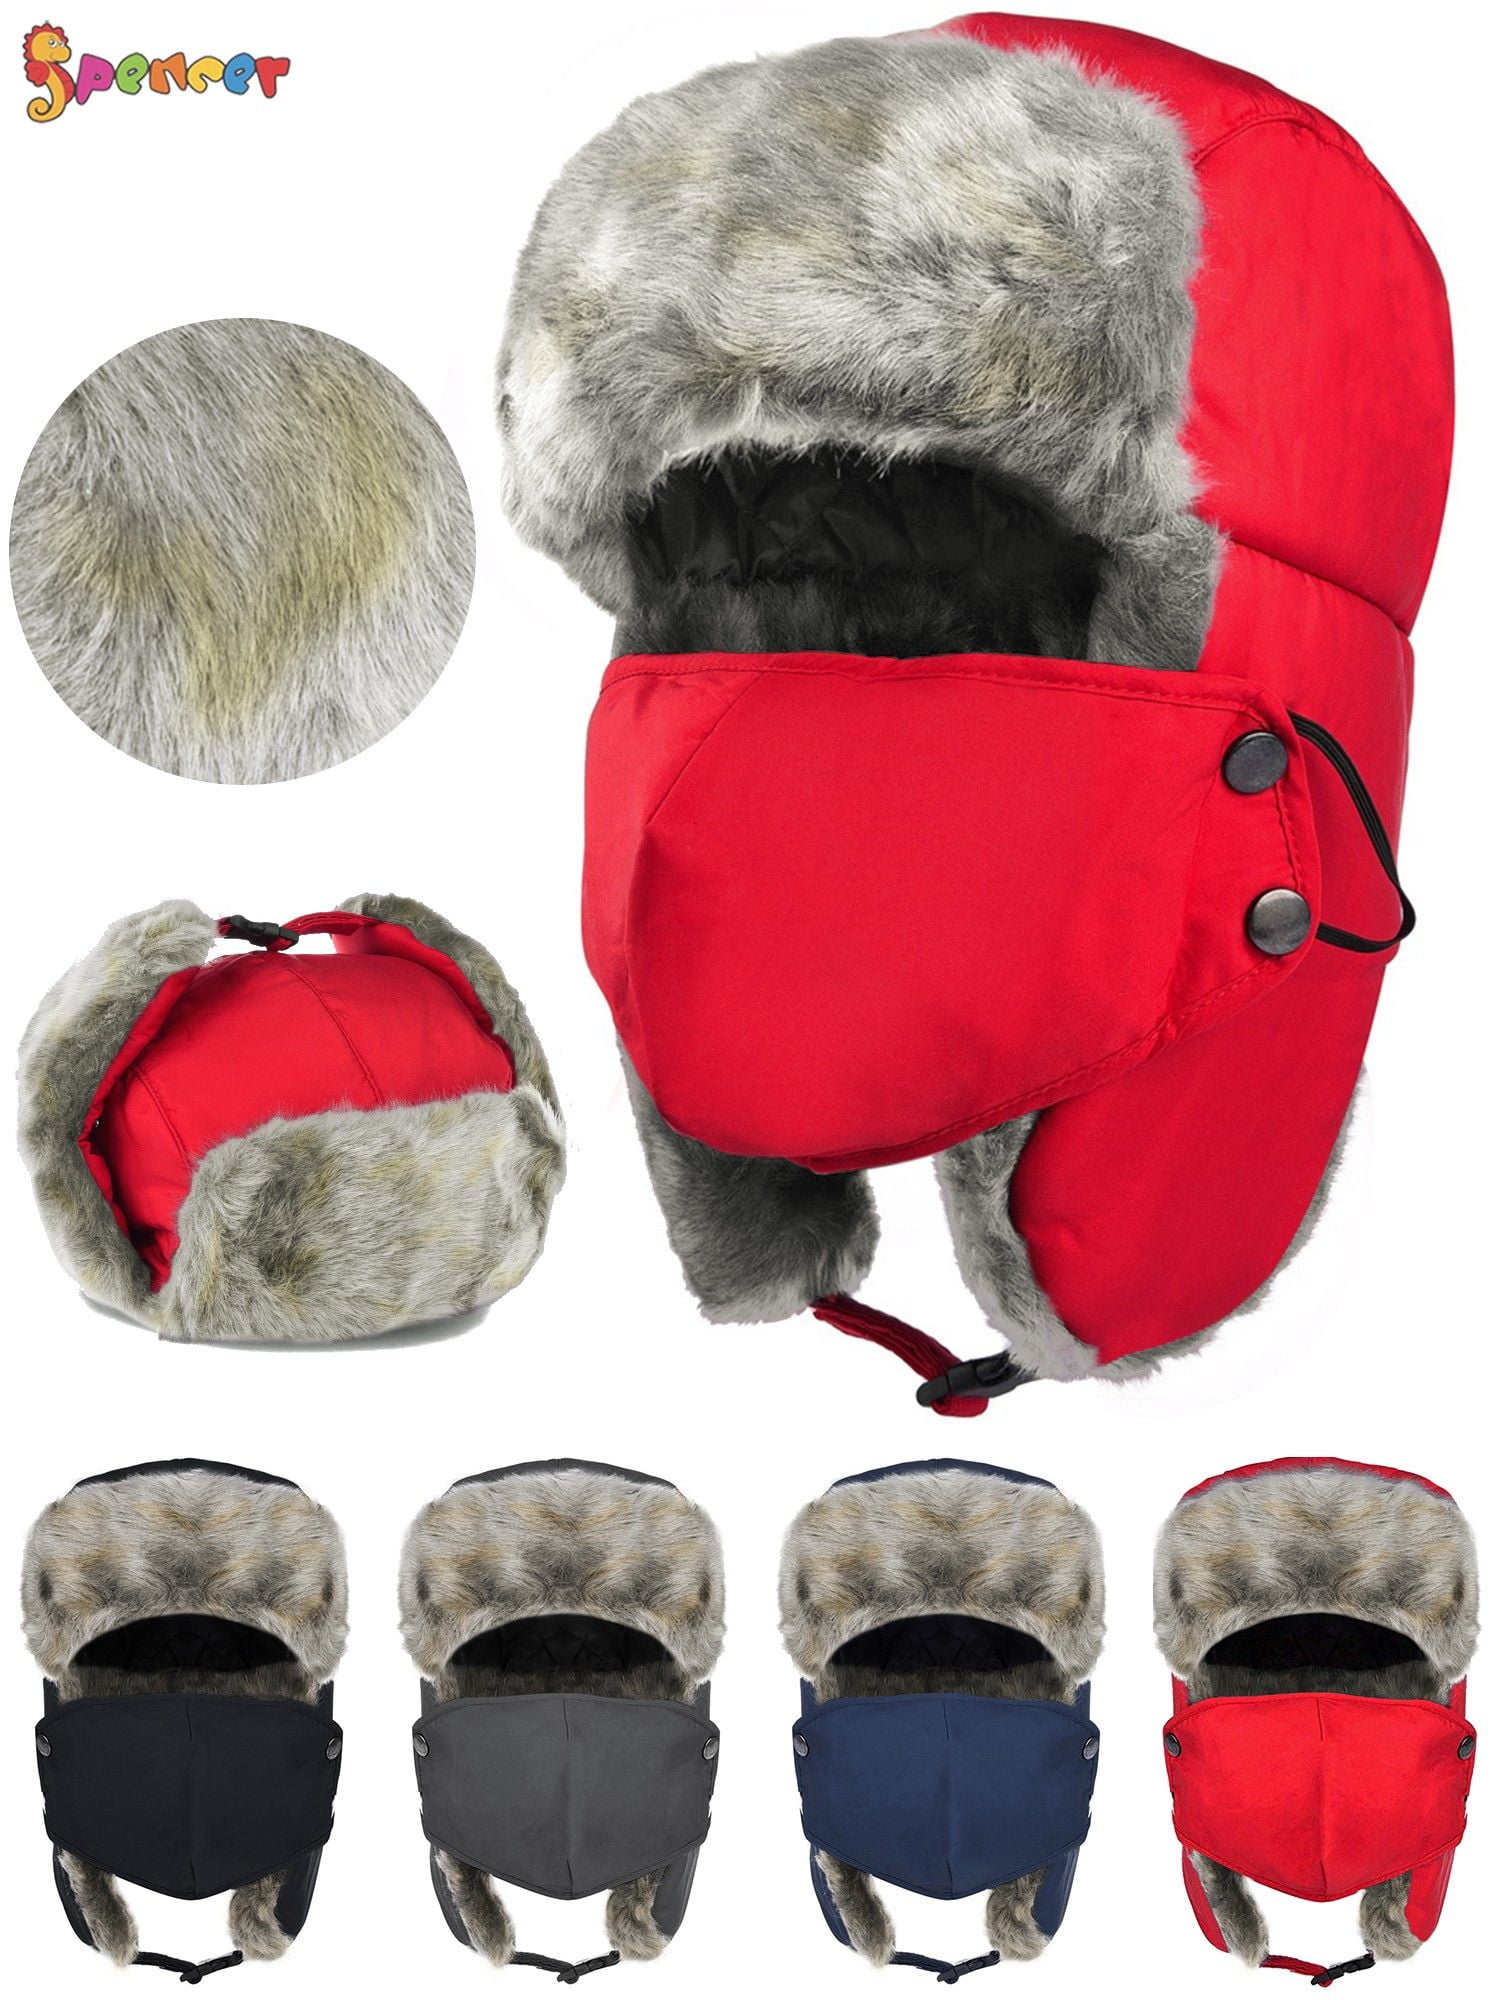 Warm Thick Winter Hats Ear Flap Bomber Hat with Windproof Mask for Hiking Unisex Trooper Trapper Hat Skating and Climbing Skiing 